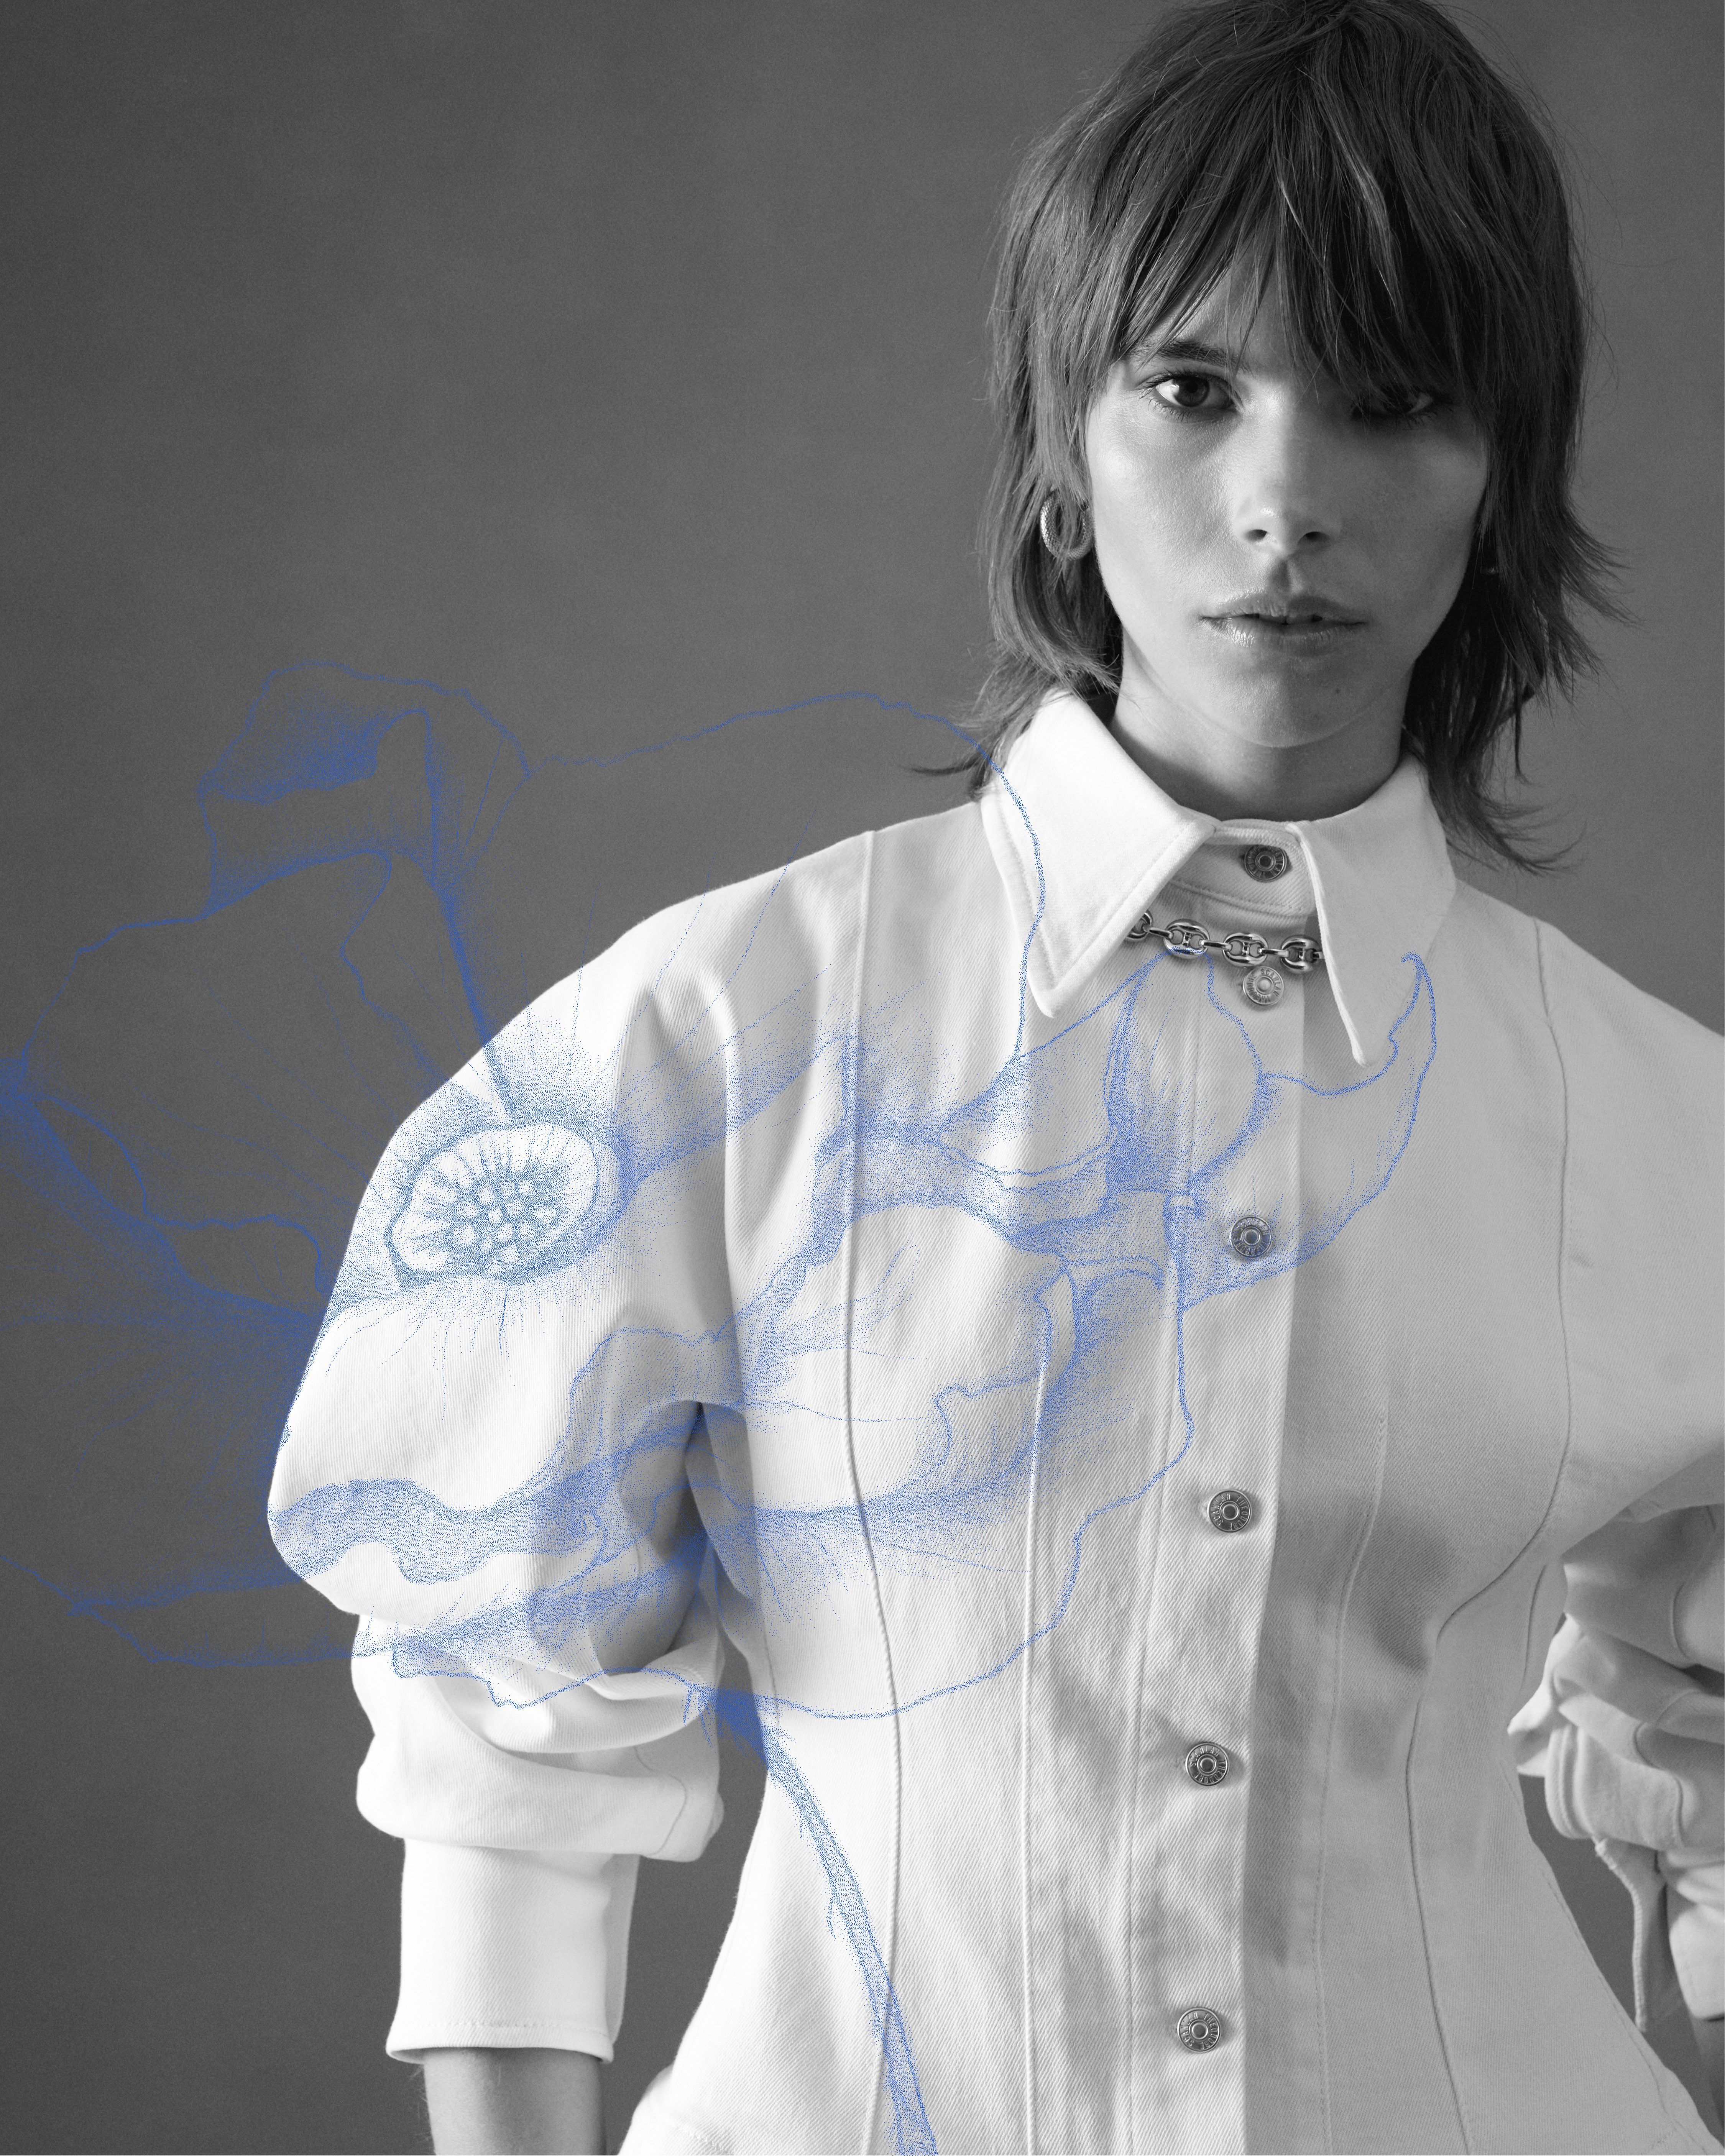 Black and white image of model wearing a white denim jacket with blue poppy illustration overlaid on top